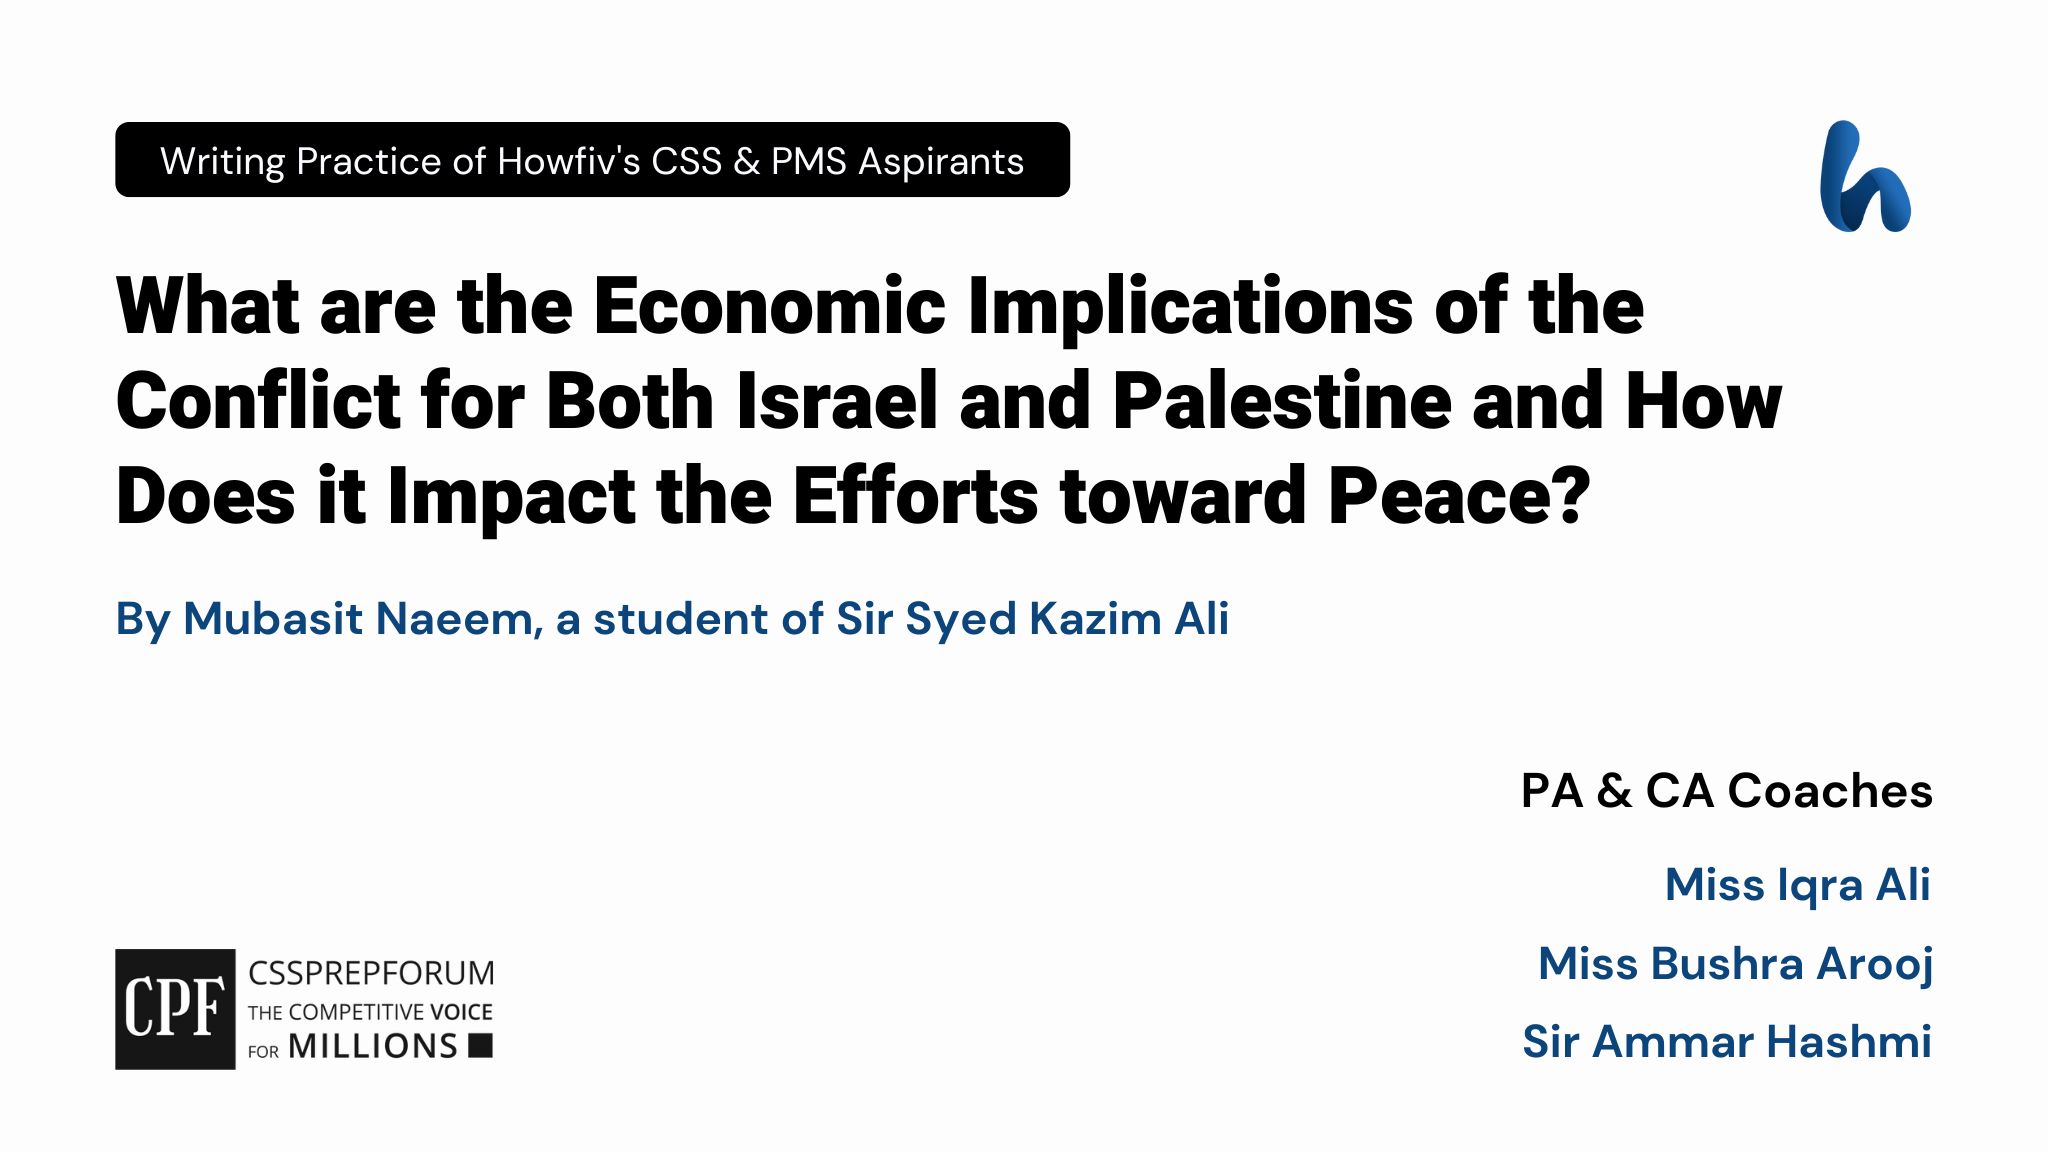 CSS Current Affairs article | Economic Implications of the Israel-Palestine Conflict | is written by Mubasit Naeem under the supervision of Sir Ammar Hashmi...